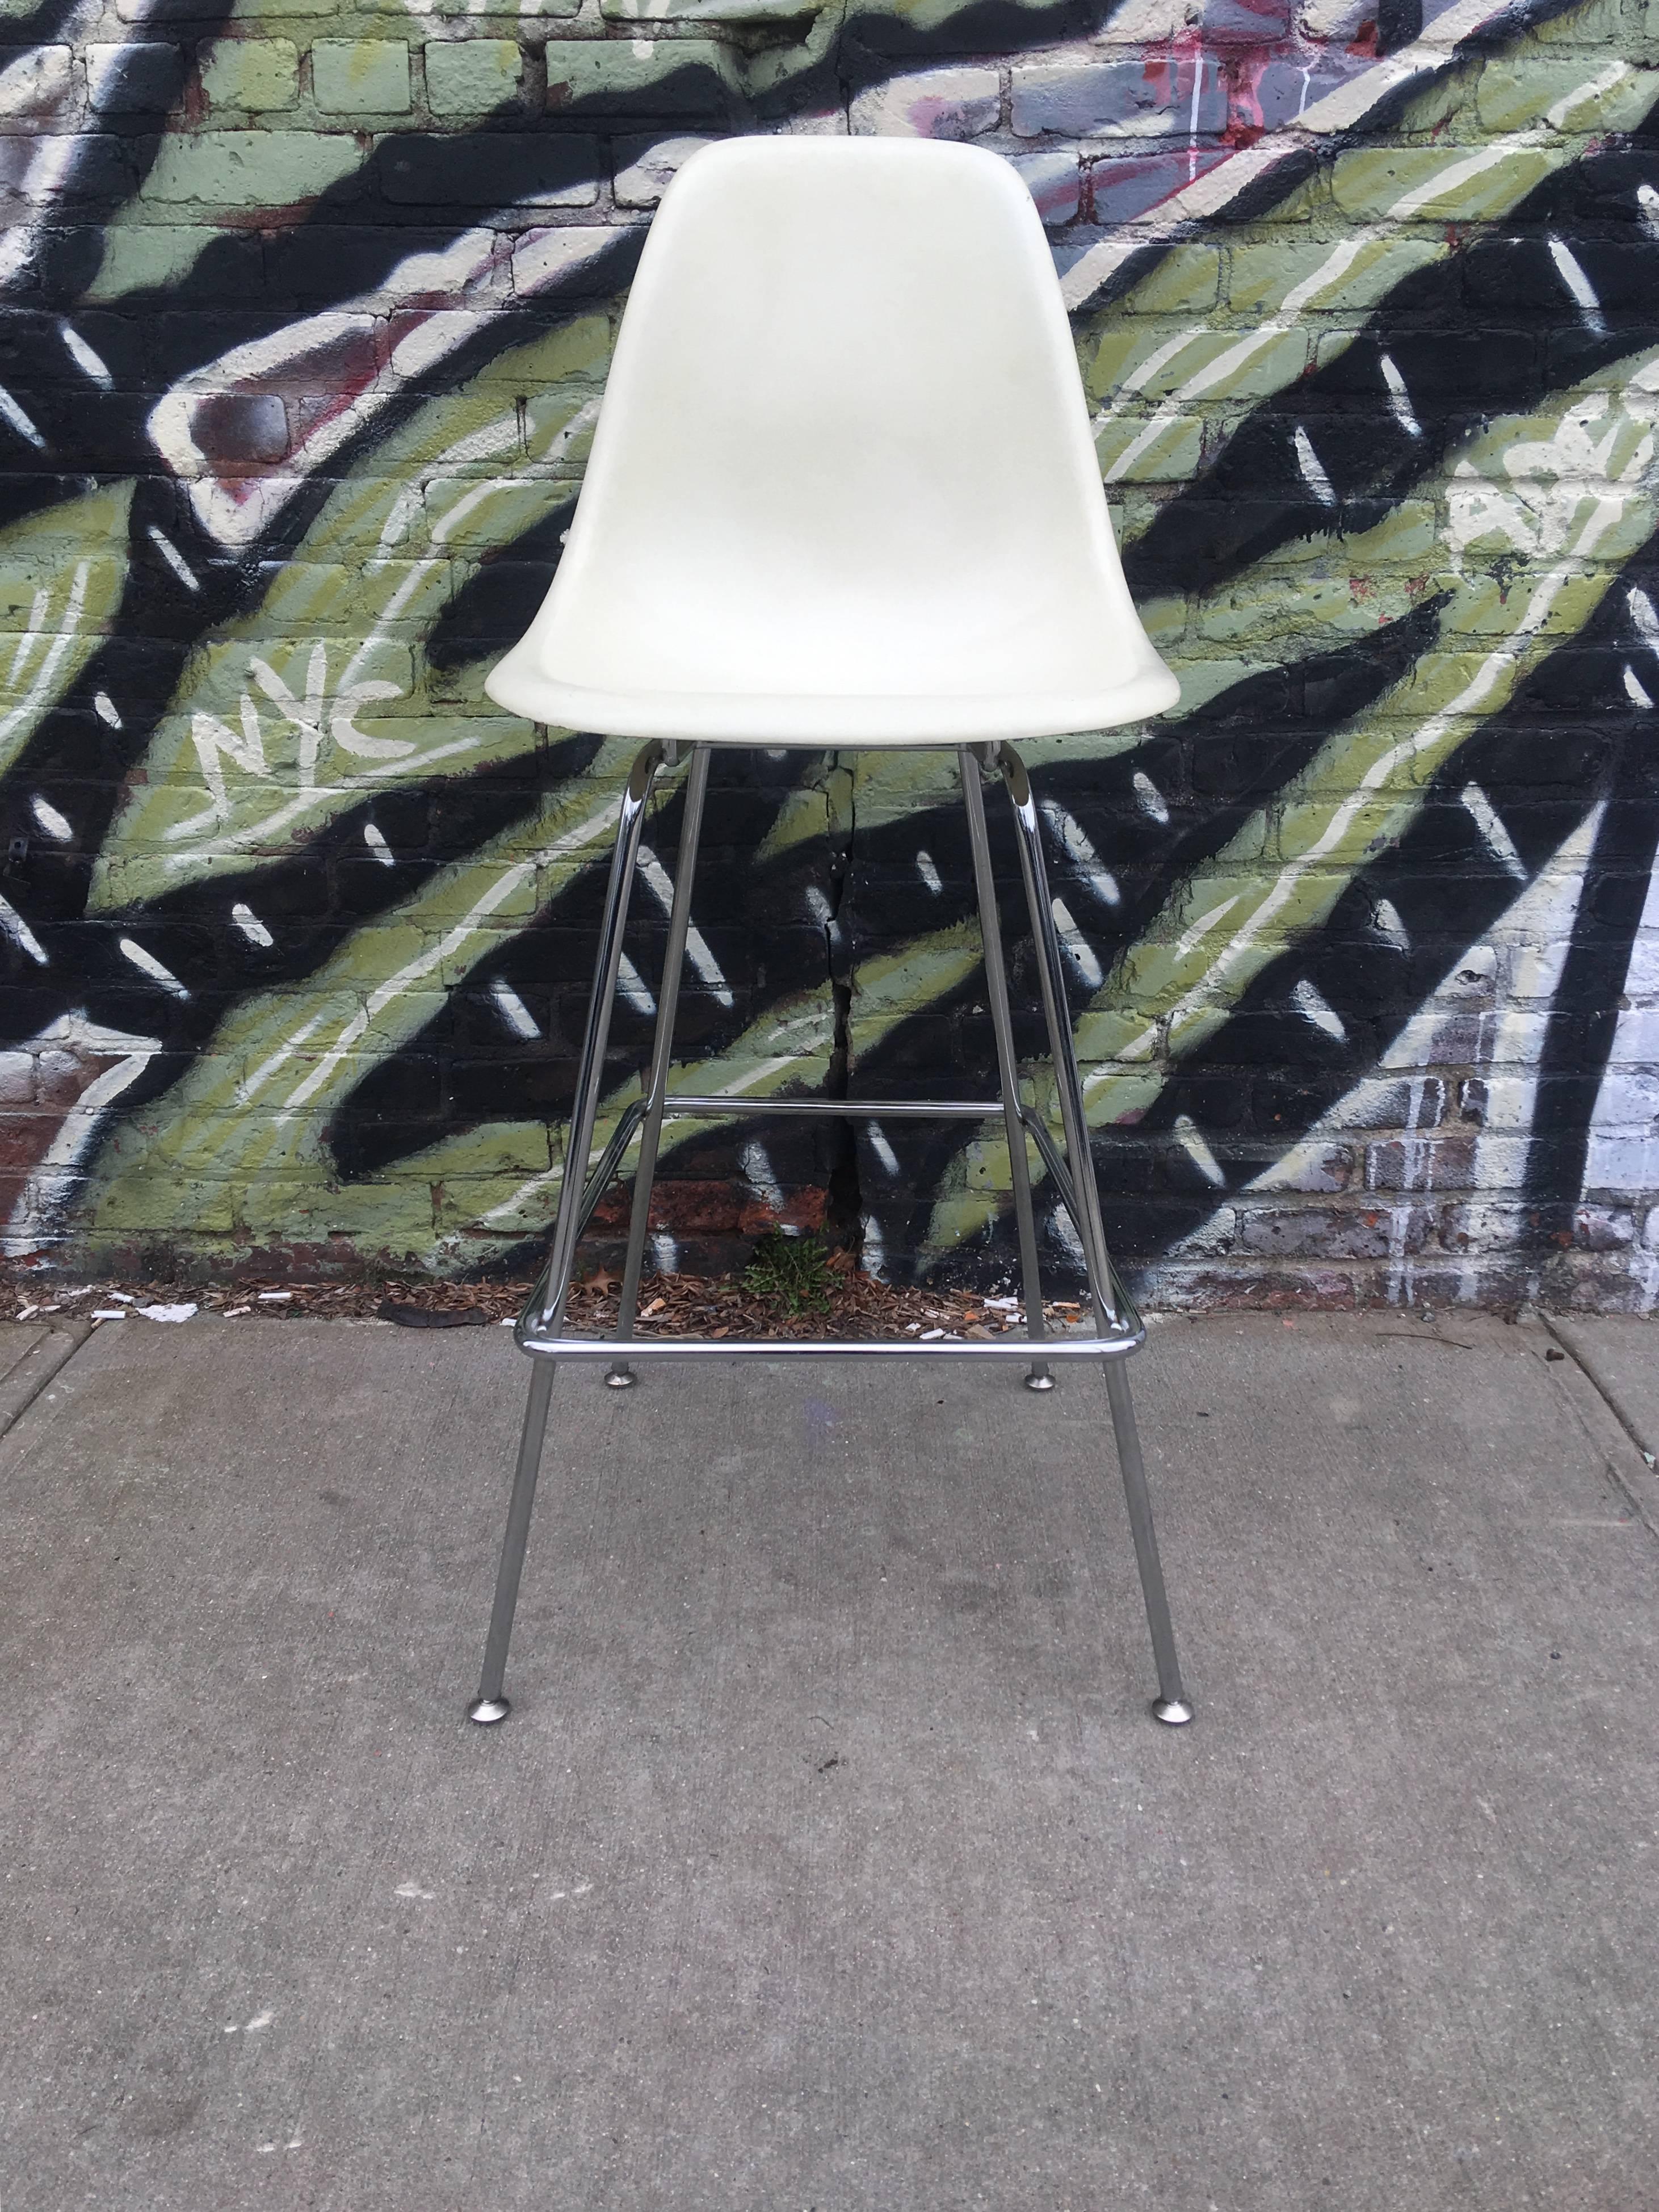 Four Herman Miller Eames barstools. Vintage shells on newer bases. Shells in excels t vintage condition. Bases have no rust or bends. Extremely comfortable and sturdy.